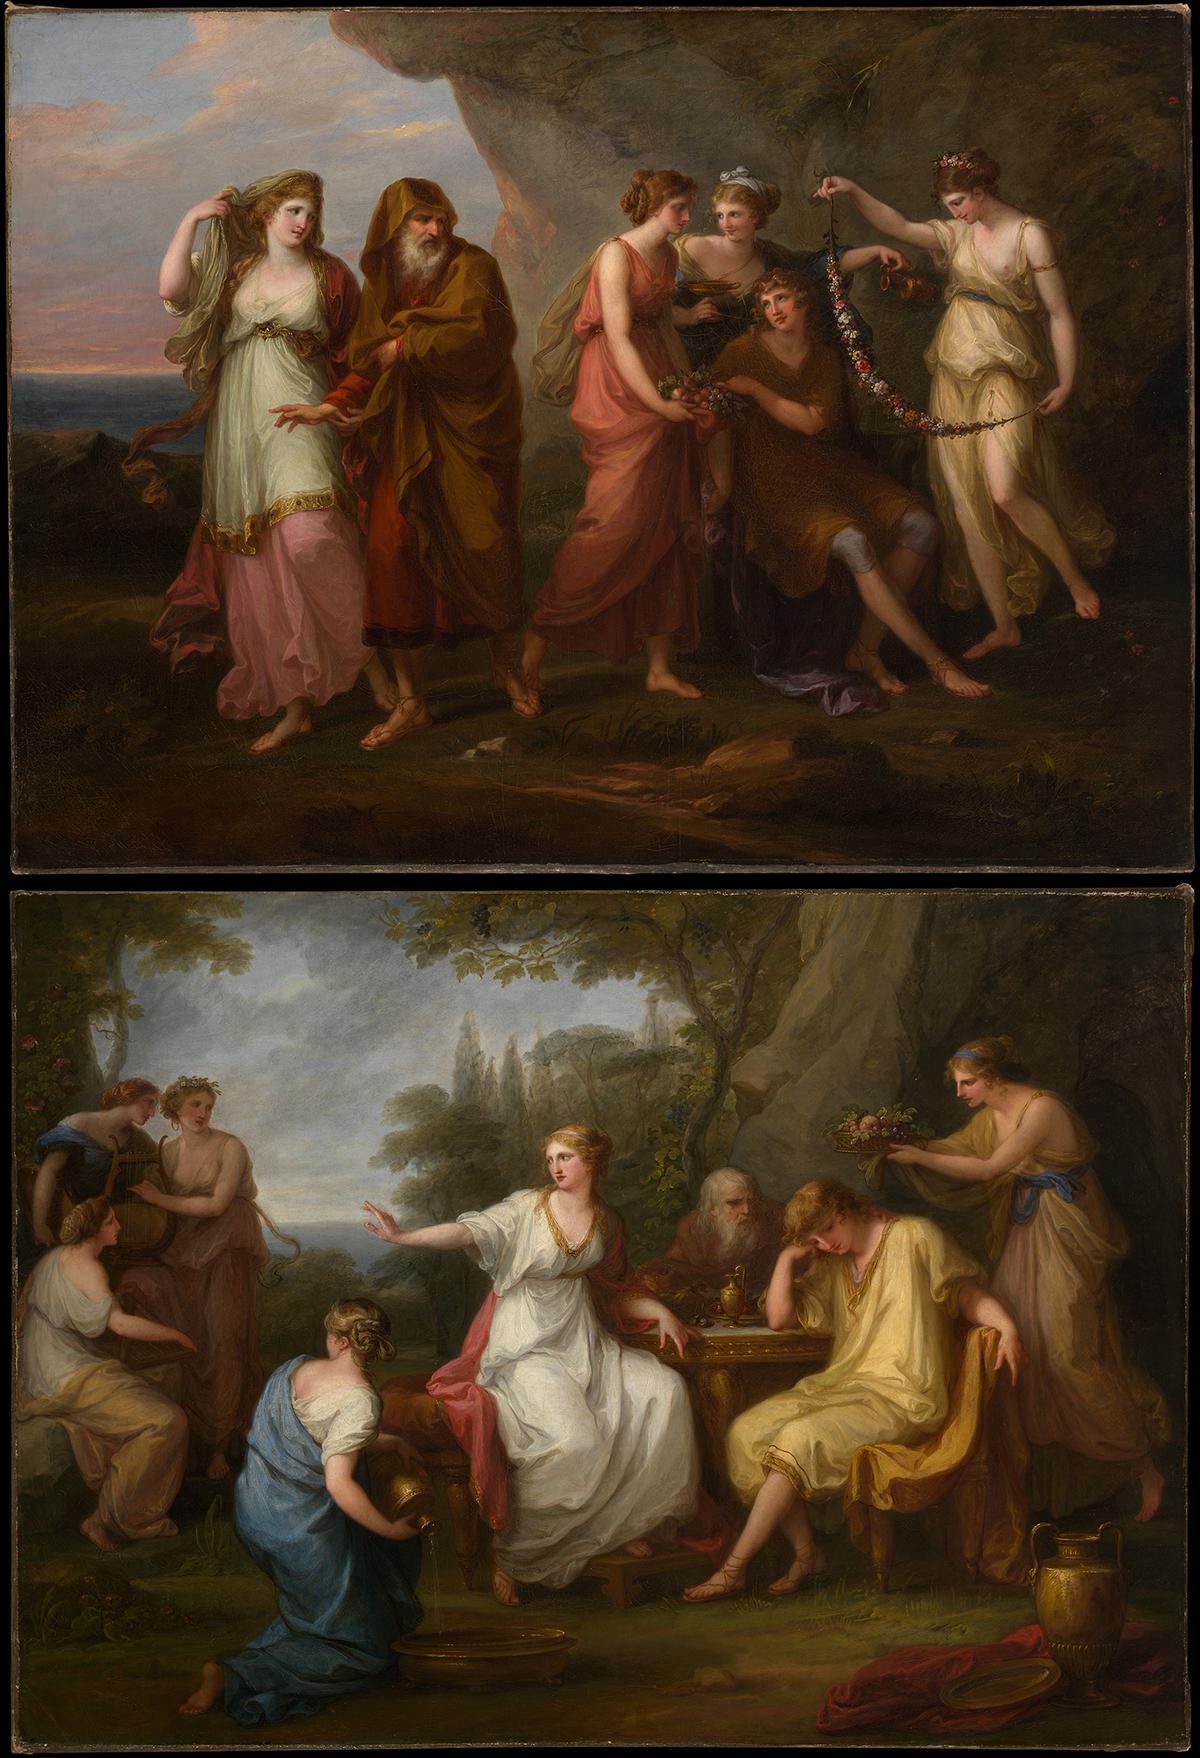 (Top) "Telemachus and the Nymphs of Calypso," 1782," by Angelica Kauffmann. Oil on canvas; 32.5 inches by 44.25 inches. (Below) "The Sorrow of Telemachus," 1783, by Angelica Kauffmann. Oil on canvas; 32.75 inches by 45 inches. The Metropolitan Museum of Art, New York City. (Public Domain)